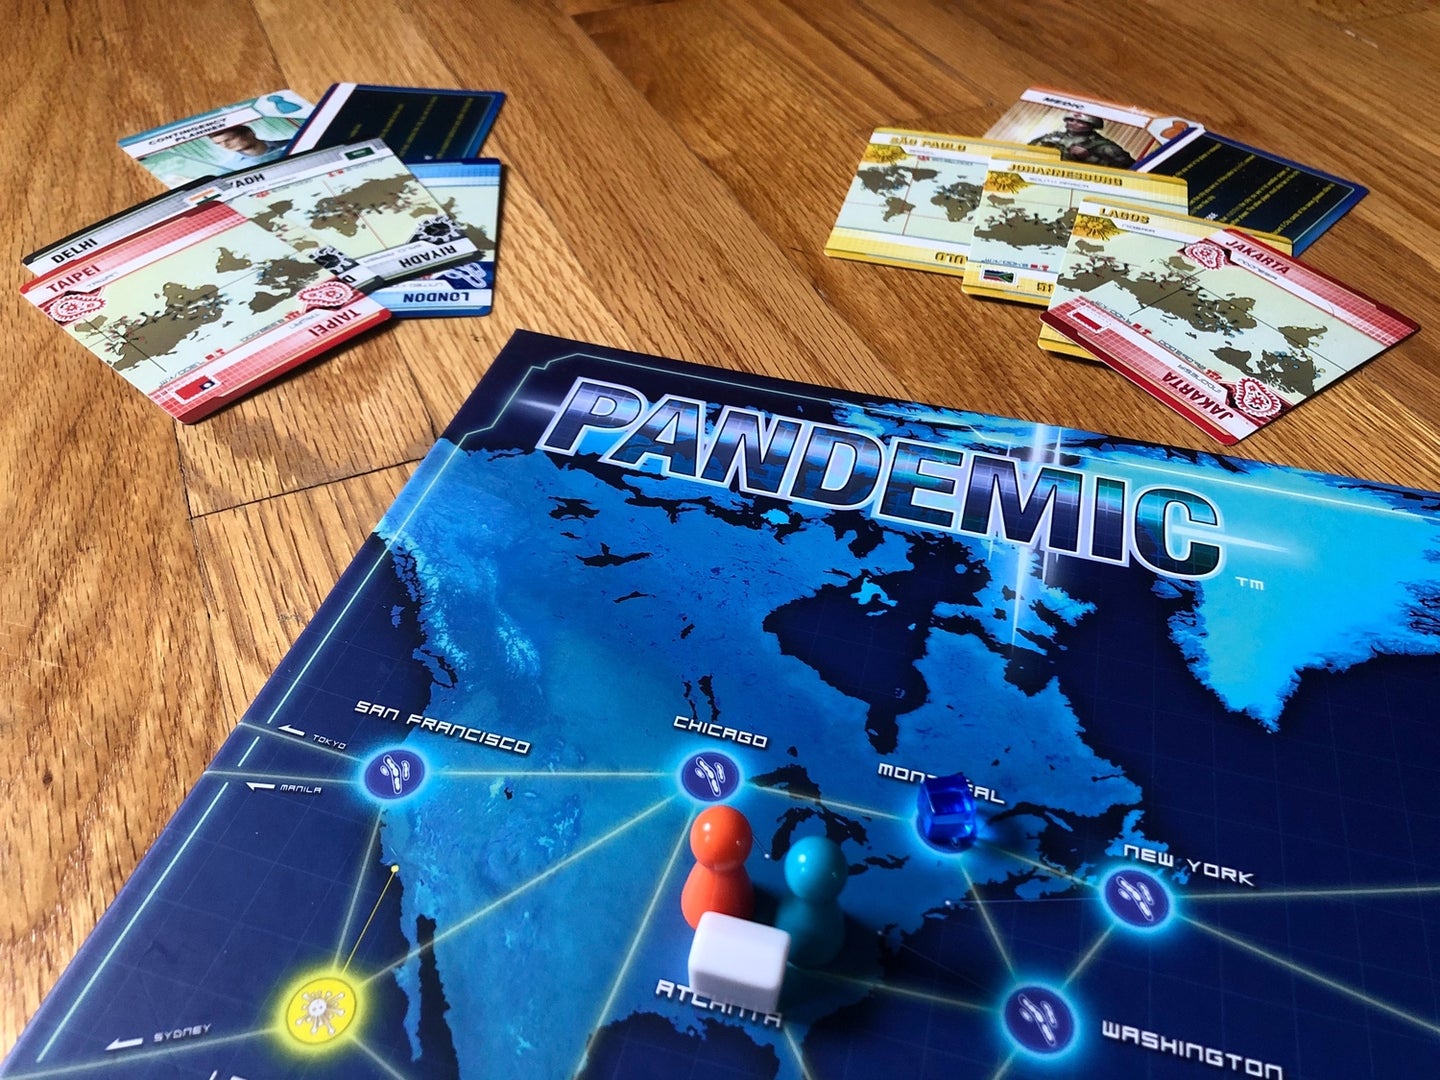 the start of the cooperative board game, Pandemic